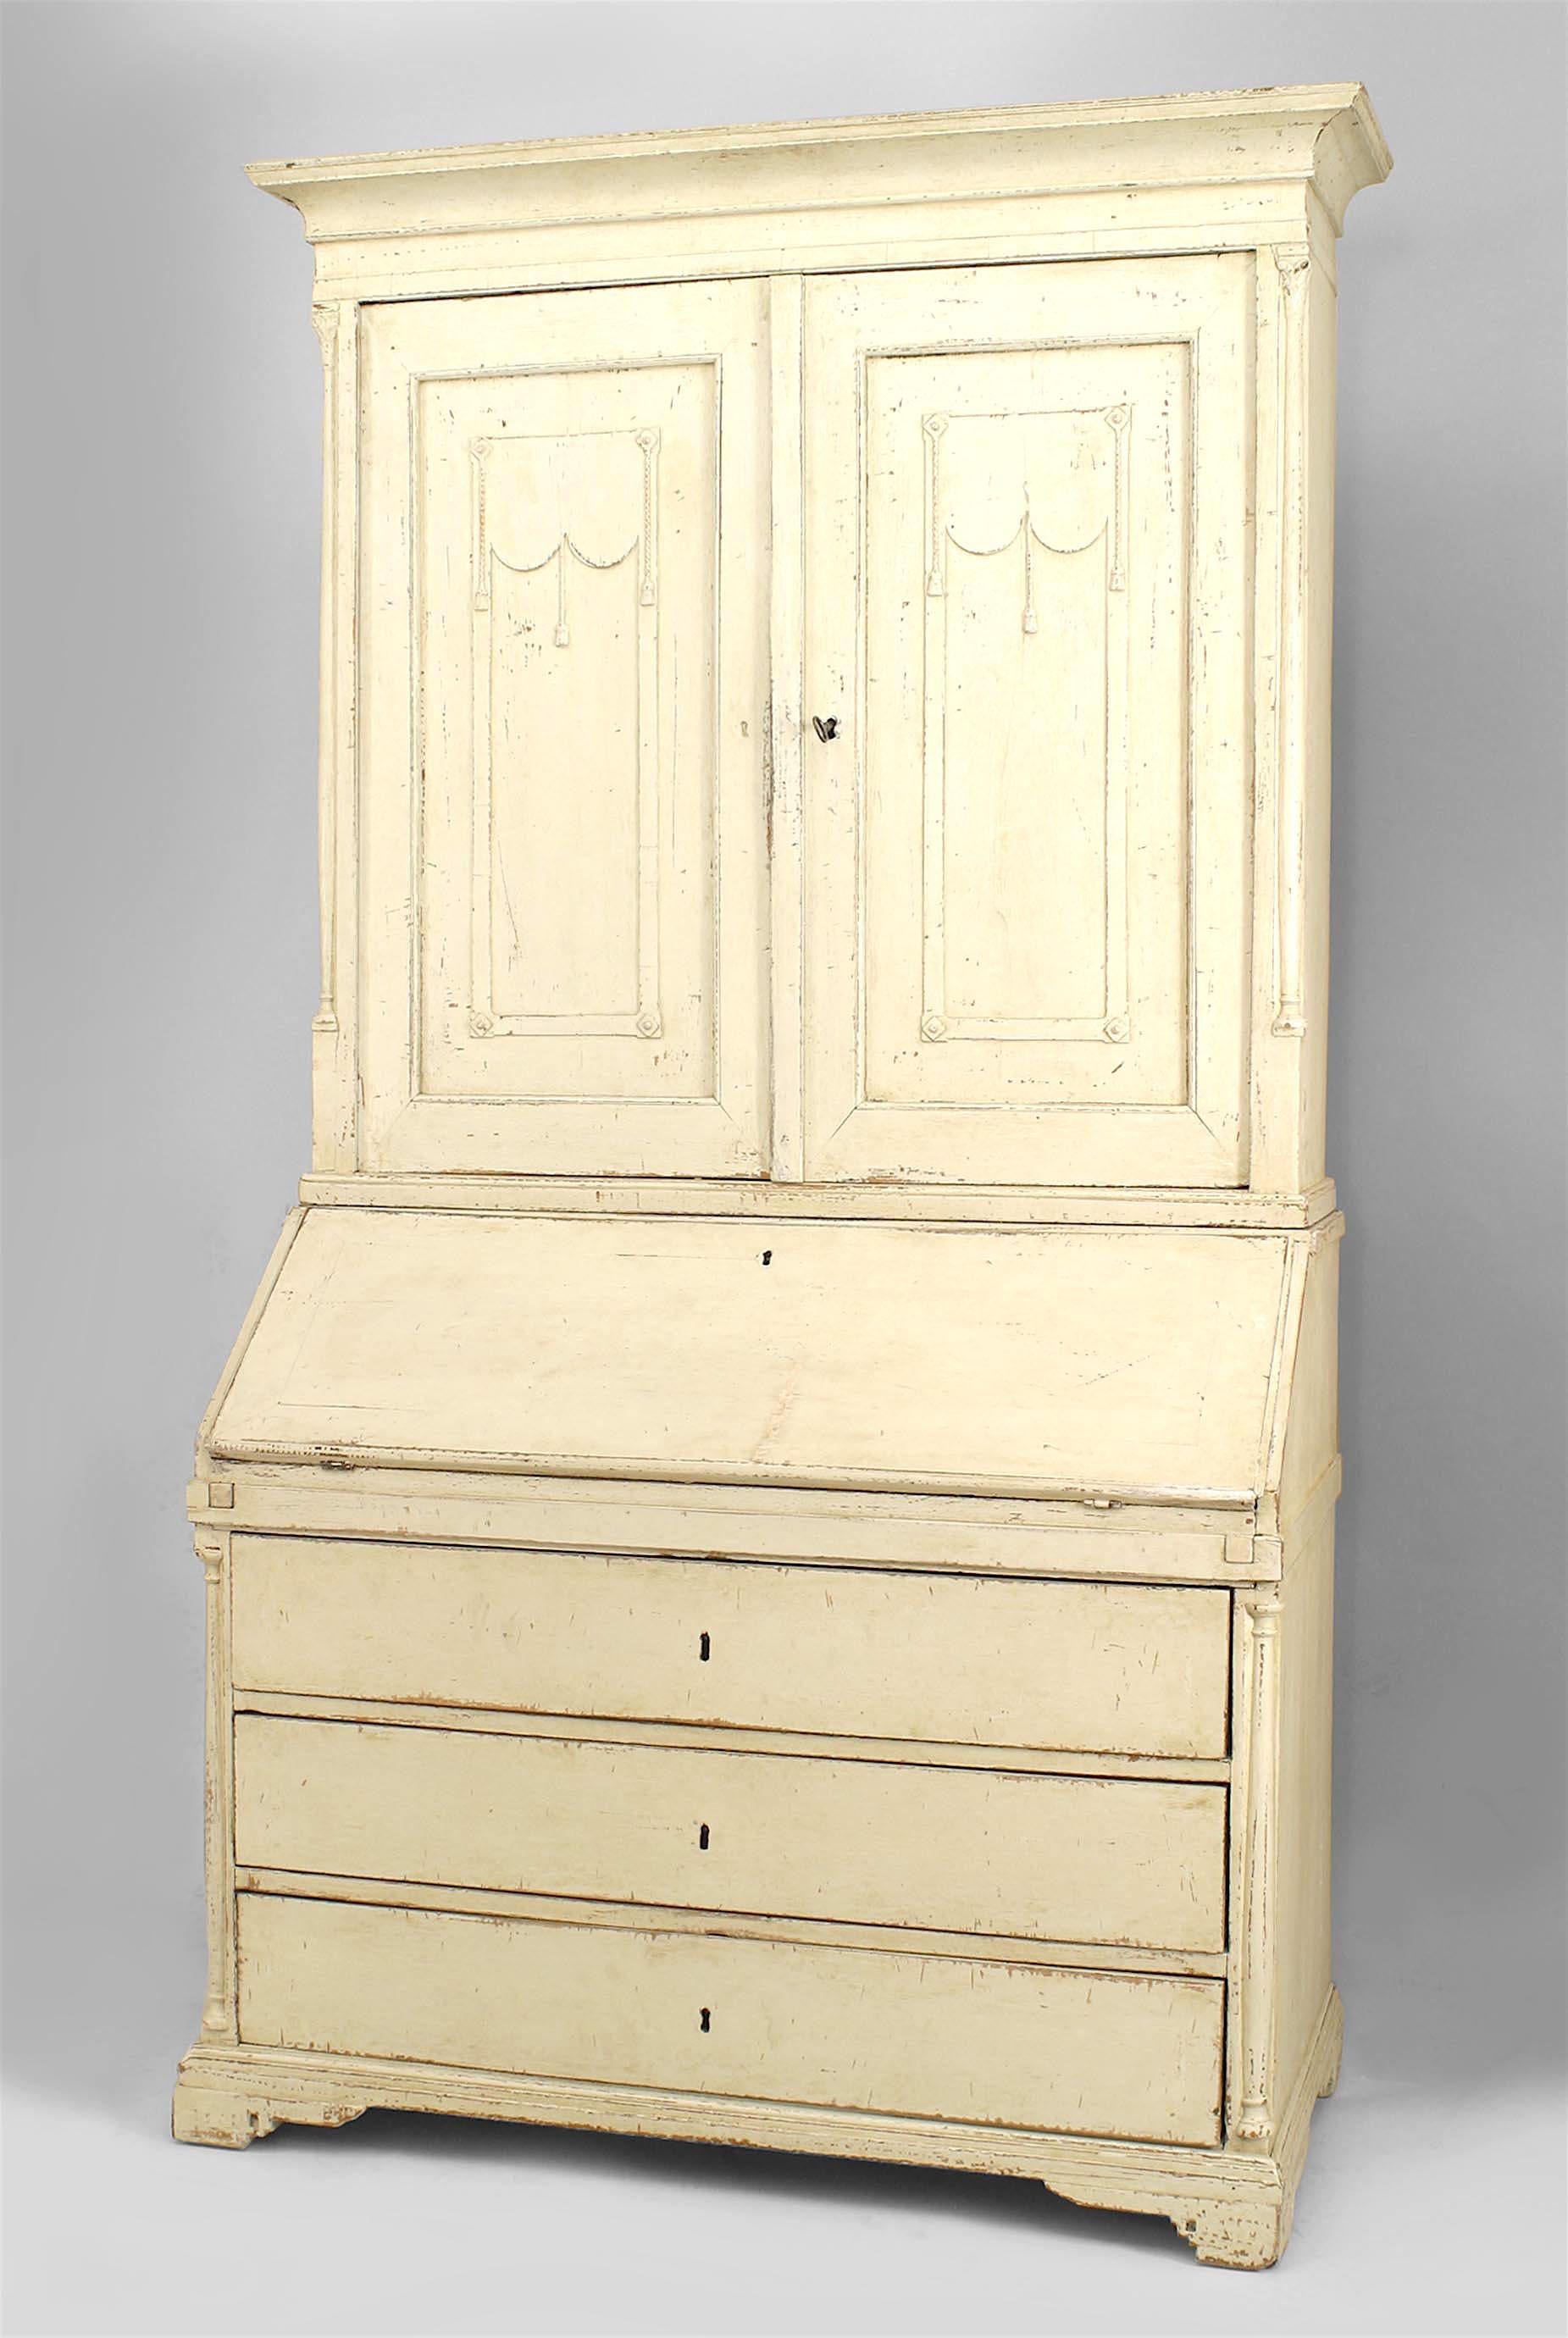 Continental Gustavian-style (Possibly Swedish/ Danish 18th Century) off-white painted secretary with carved column sides and carved simple swag and tassel design on front top section doors
